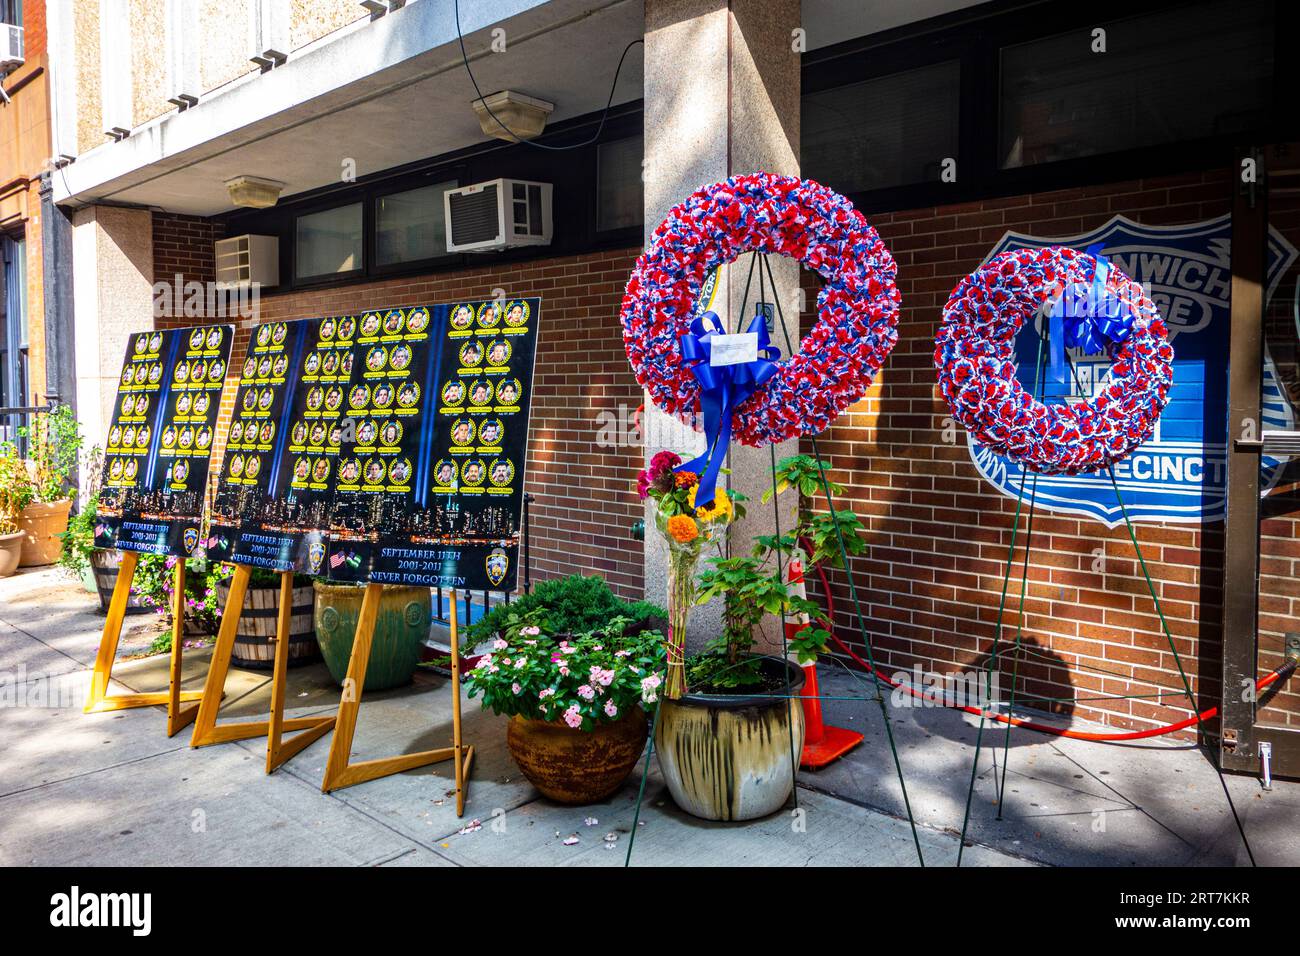 Remembrance of 9/11 at 6th precinct station with wreathes and list of police officers lost on September 11, 2001, 10th St. Greenwich Village, New York Stock Photo